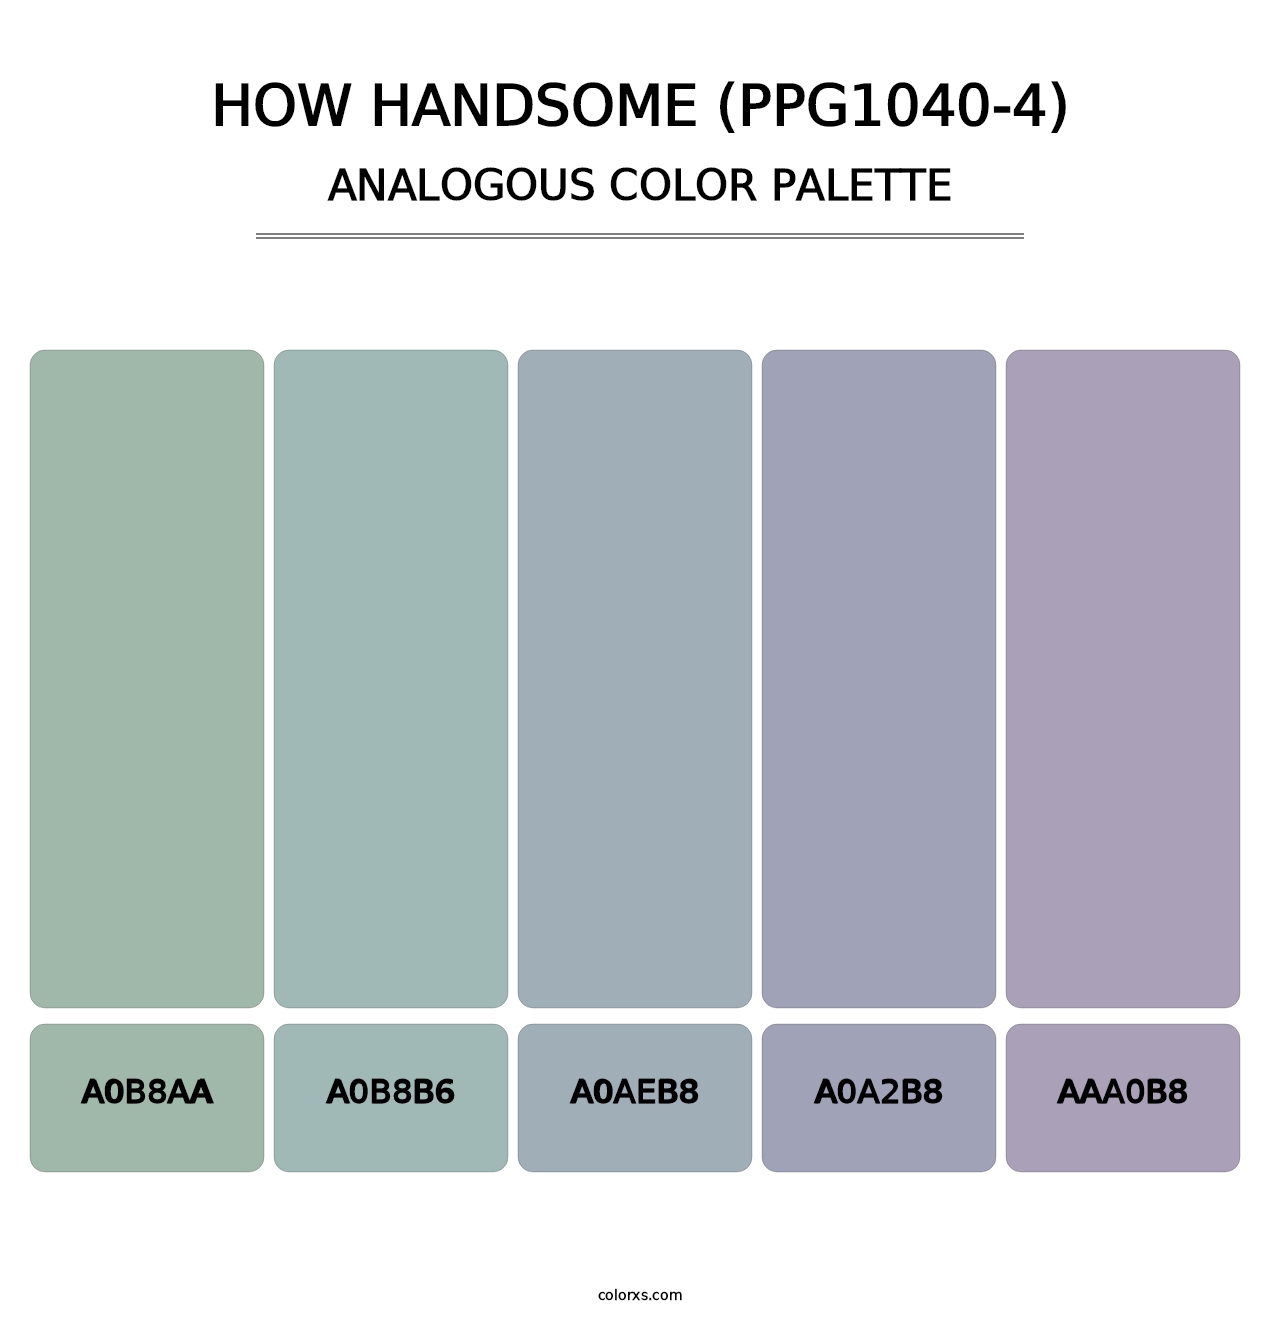 How Handsome (PPG1040-4) - Analogous Color Palette